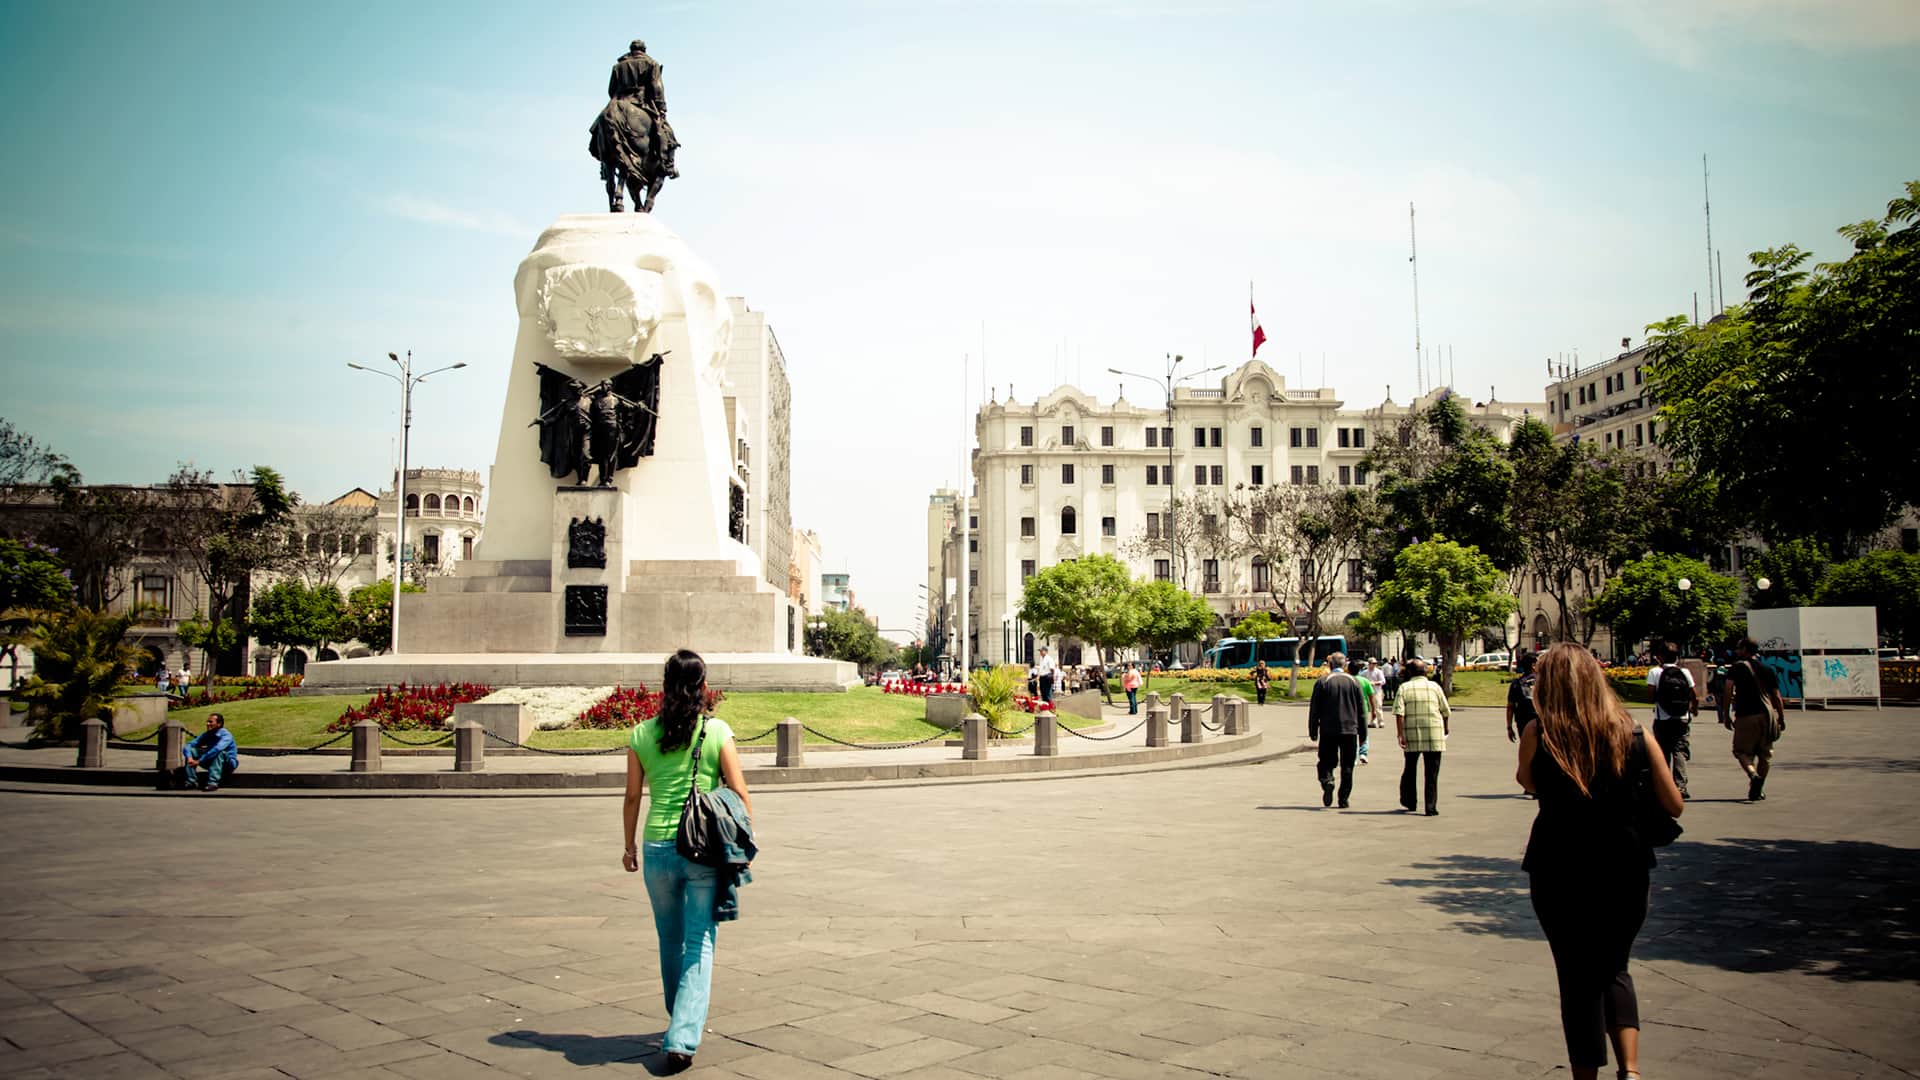 11San Martin square is characterized by the big monument to the independence leader | Responsible Travel Peru